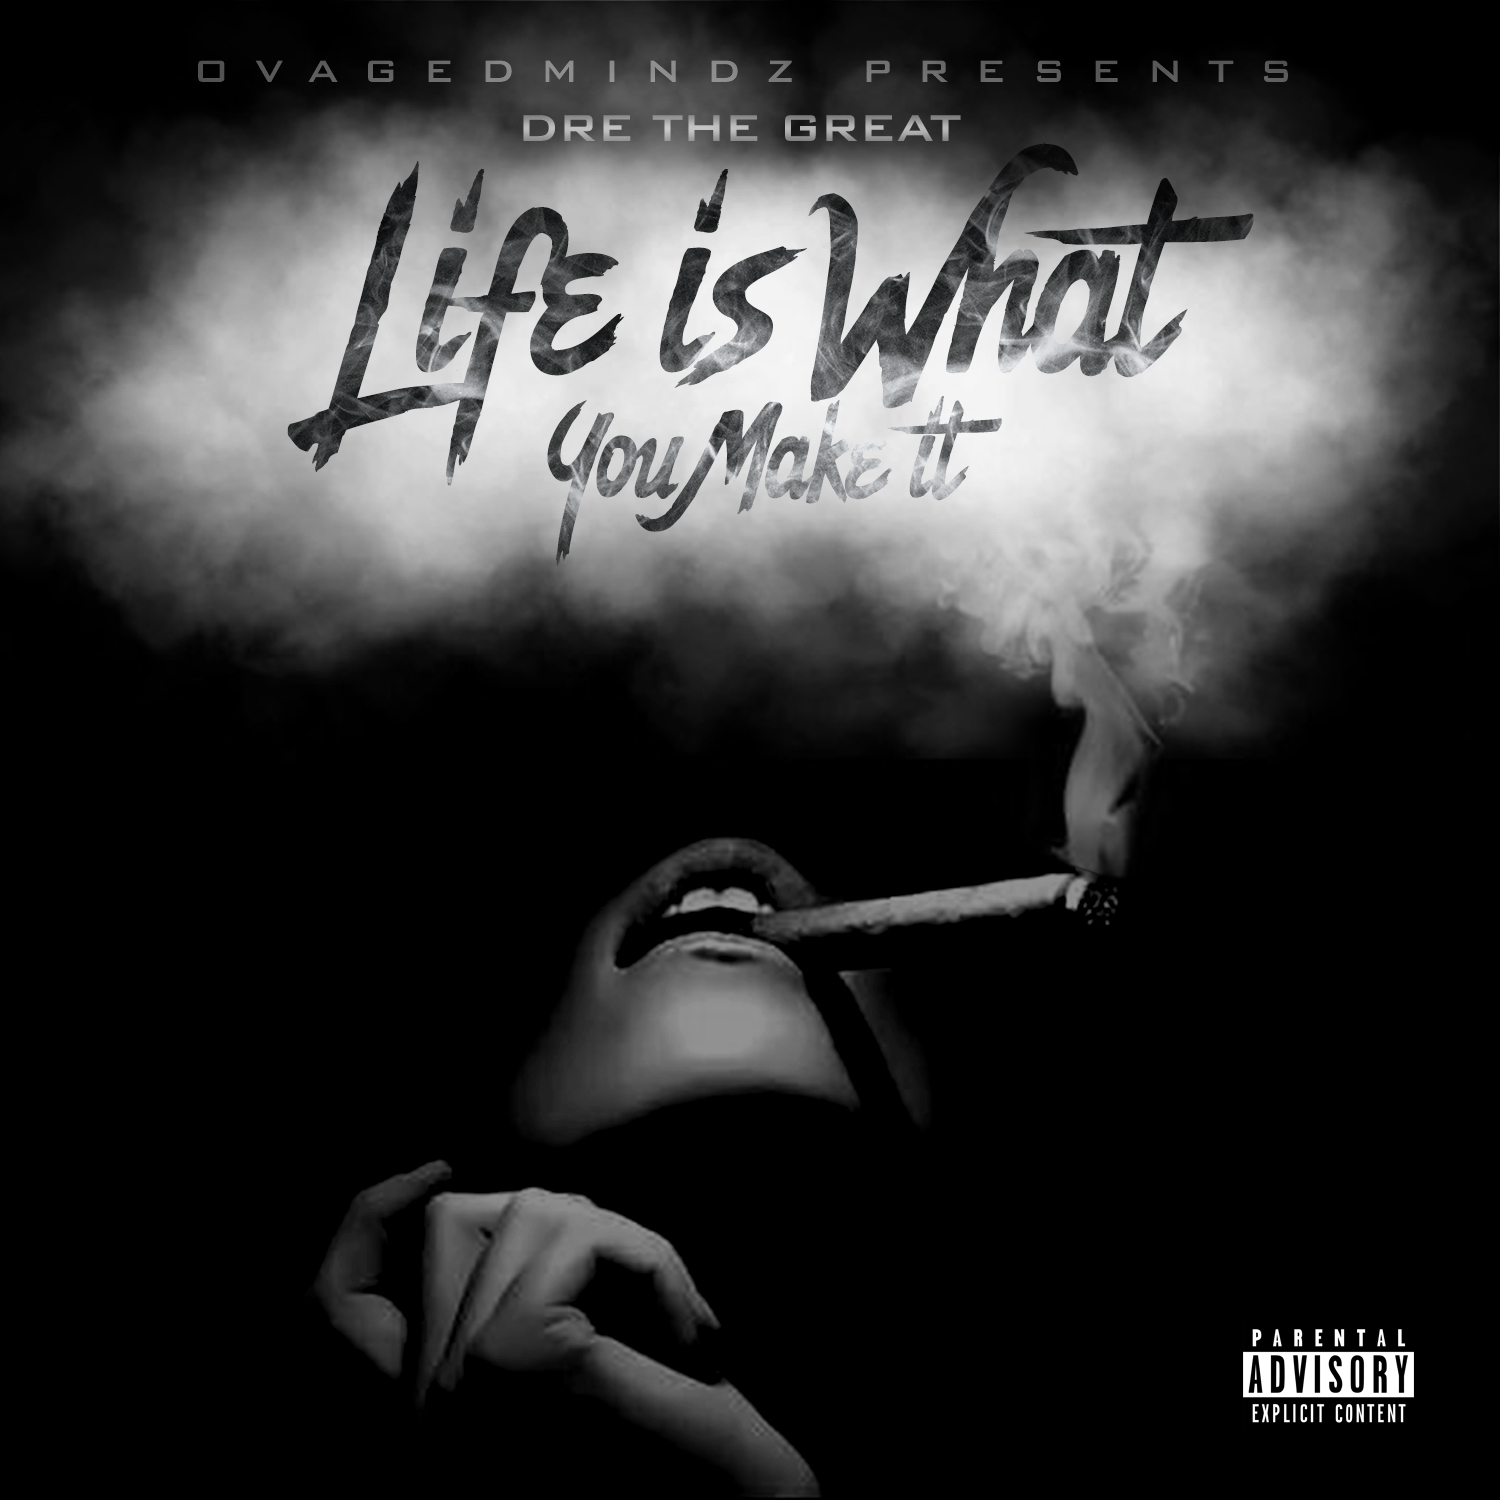 Dre The Great & Ovagedmindz Presents “Life is What You Make It” The EP